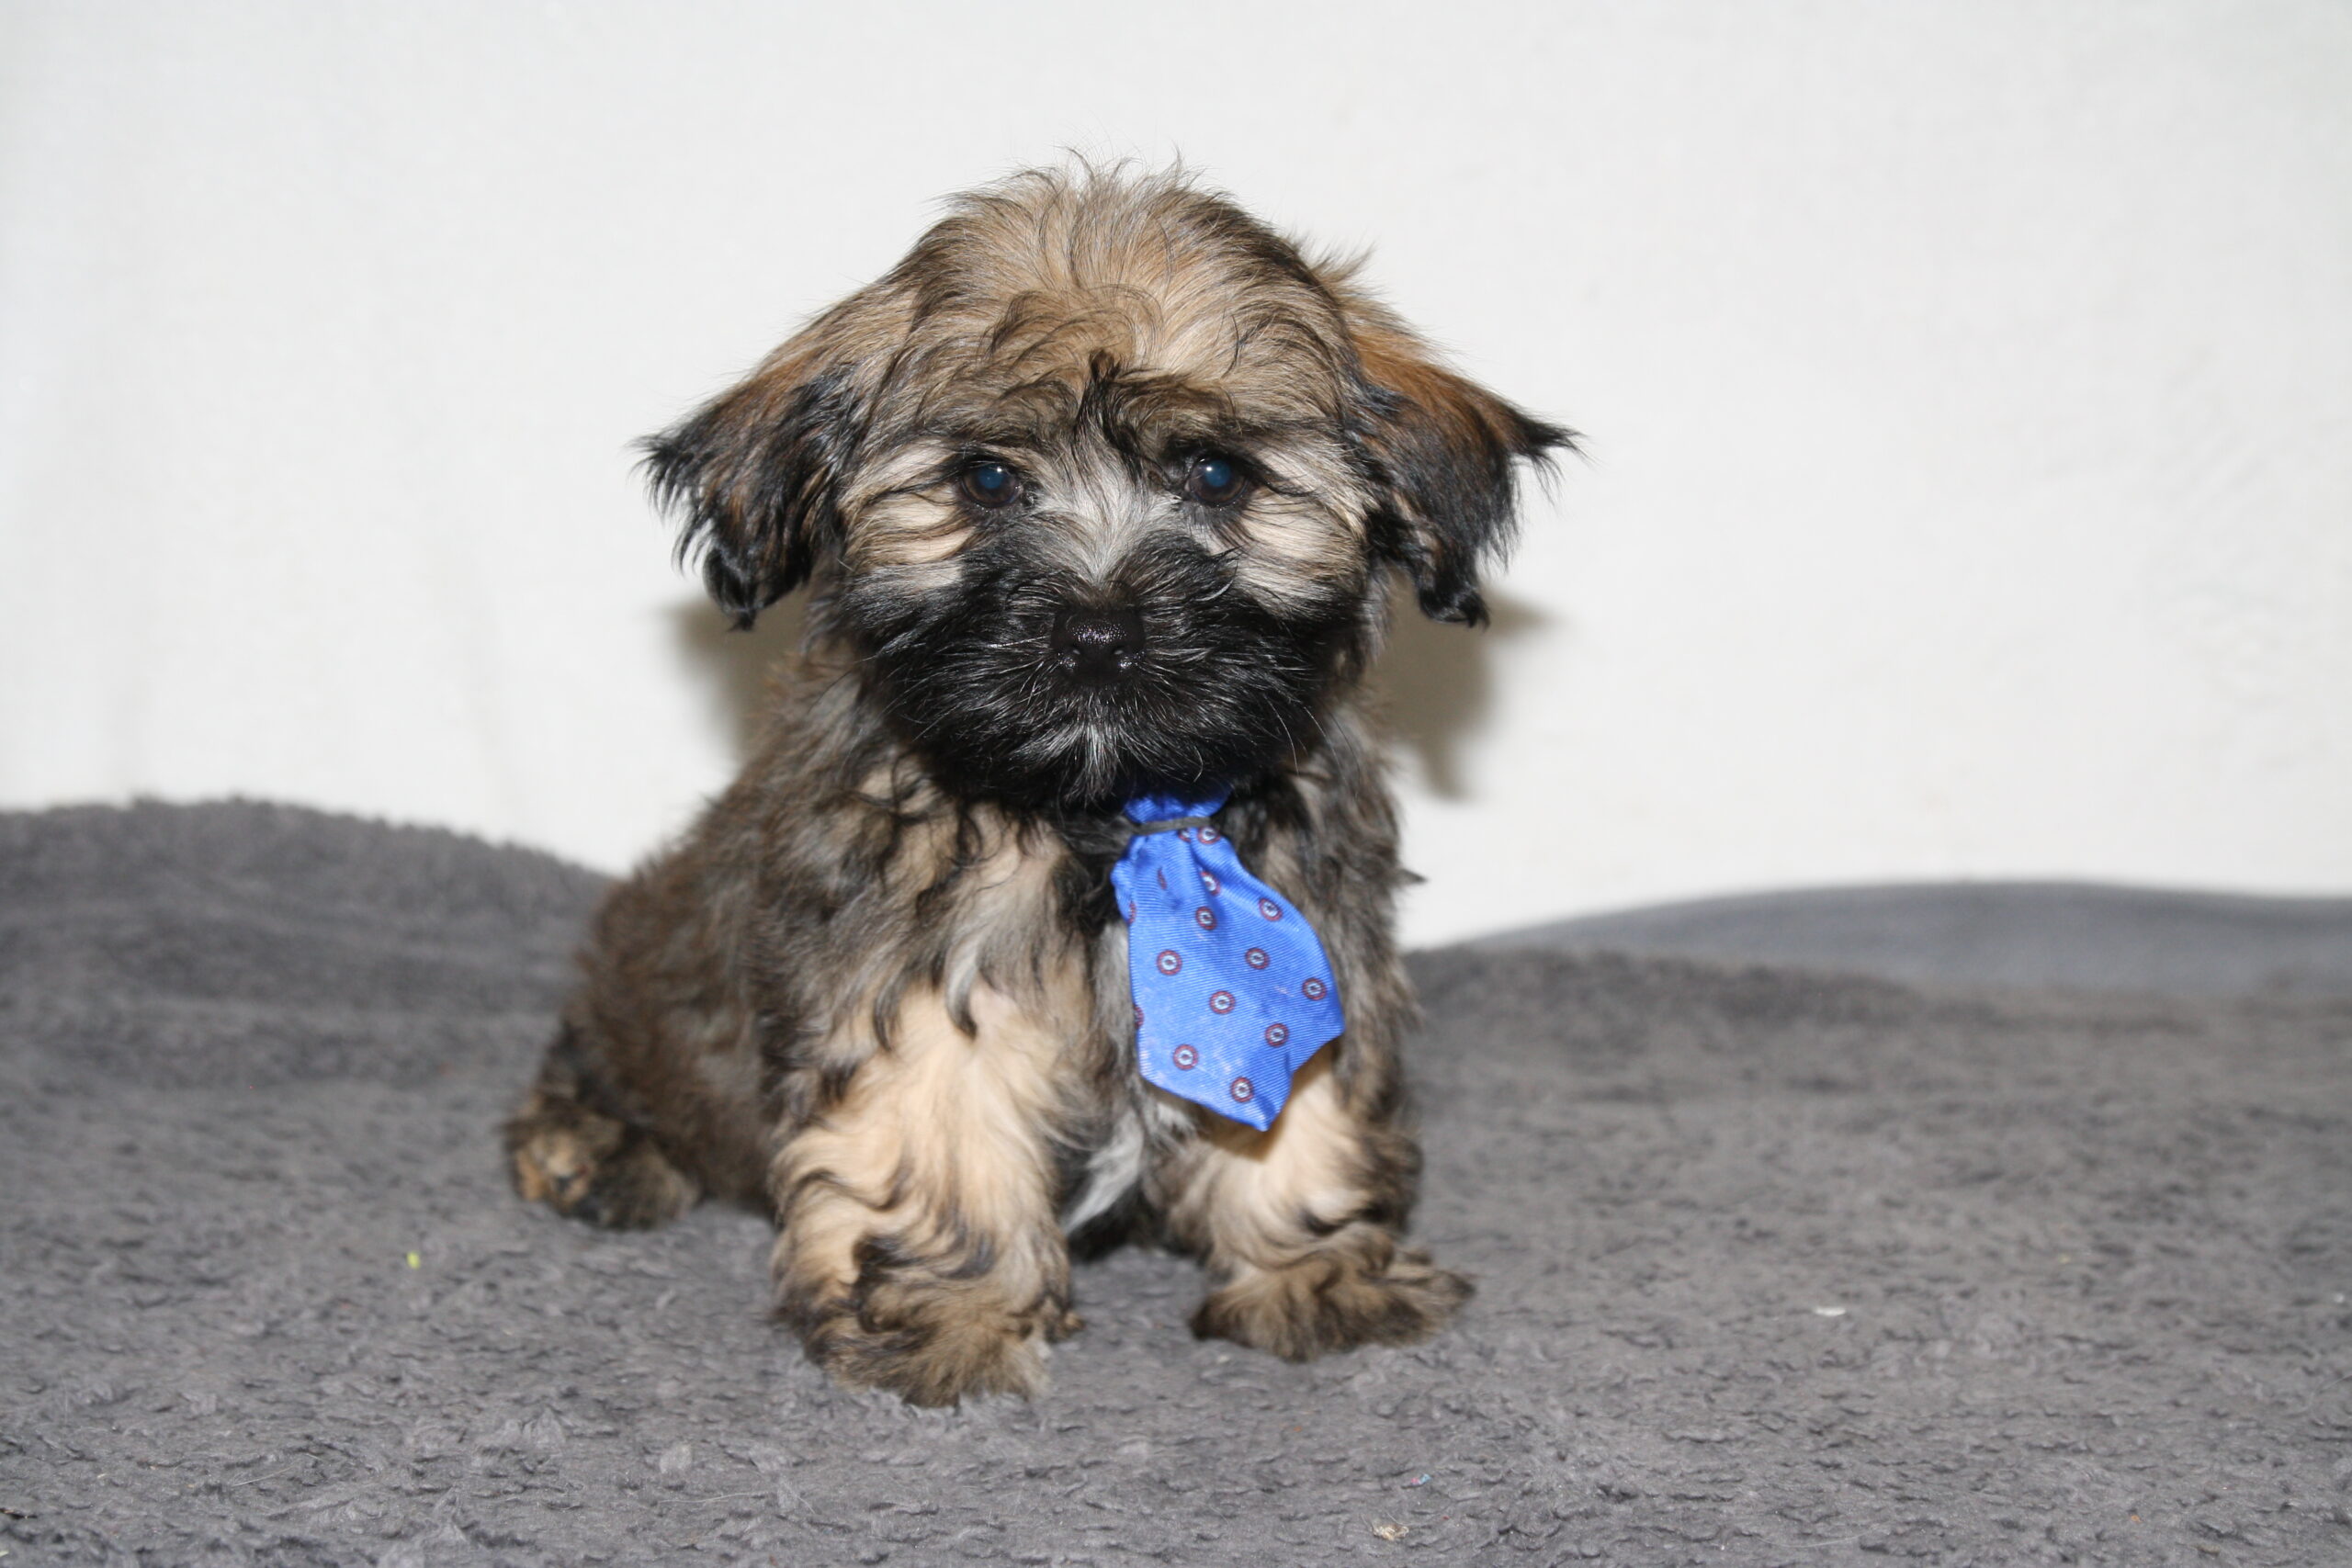 "Oliver"
DOB: 5/18/2022
Breed: Havanese
Sex: Male
Availability: Ready to go home.
Price: $1000